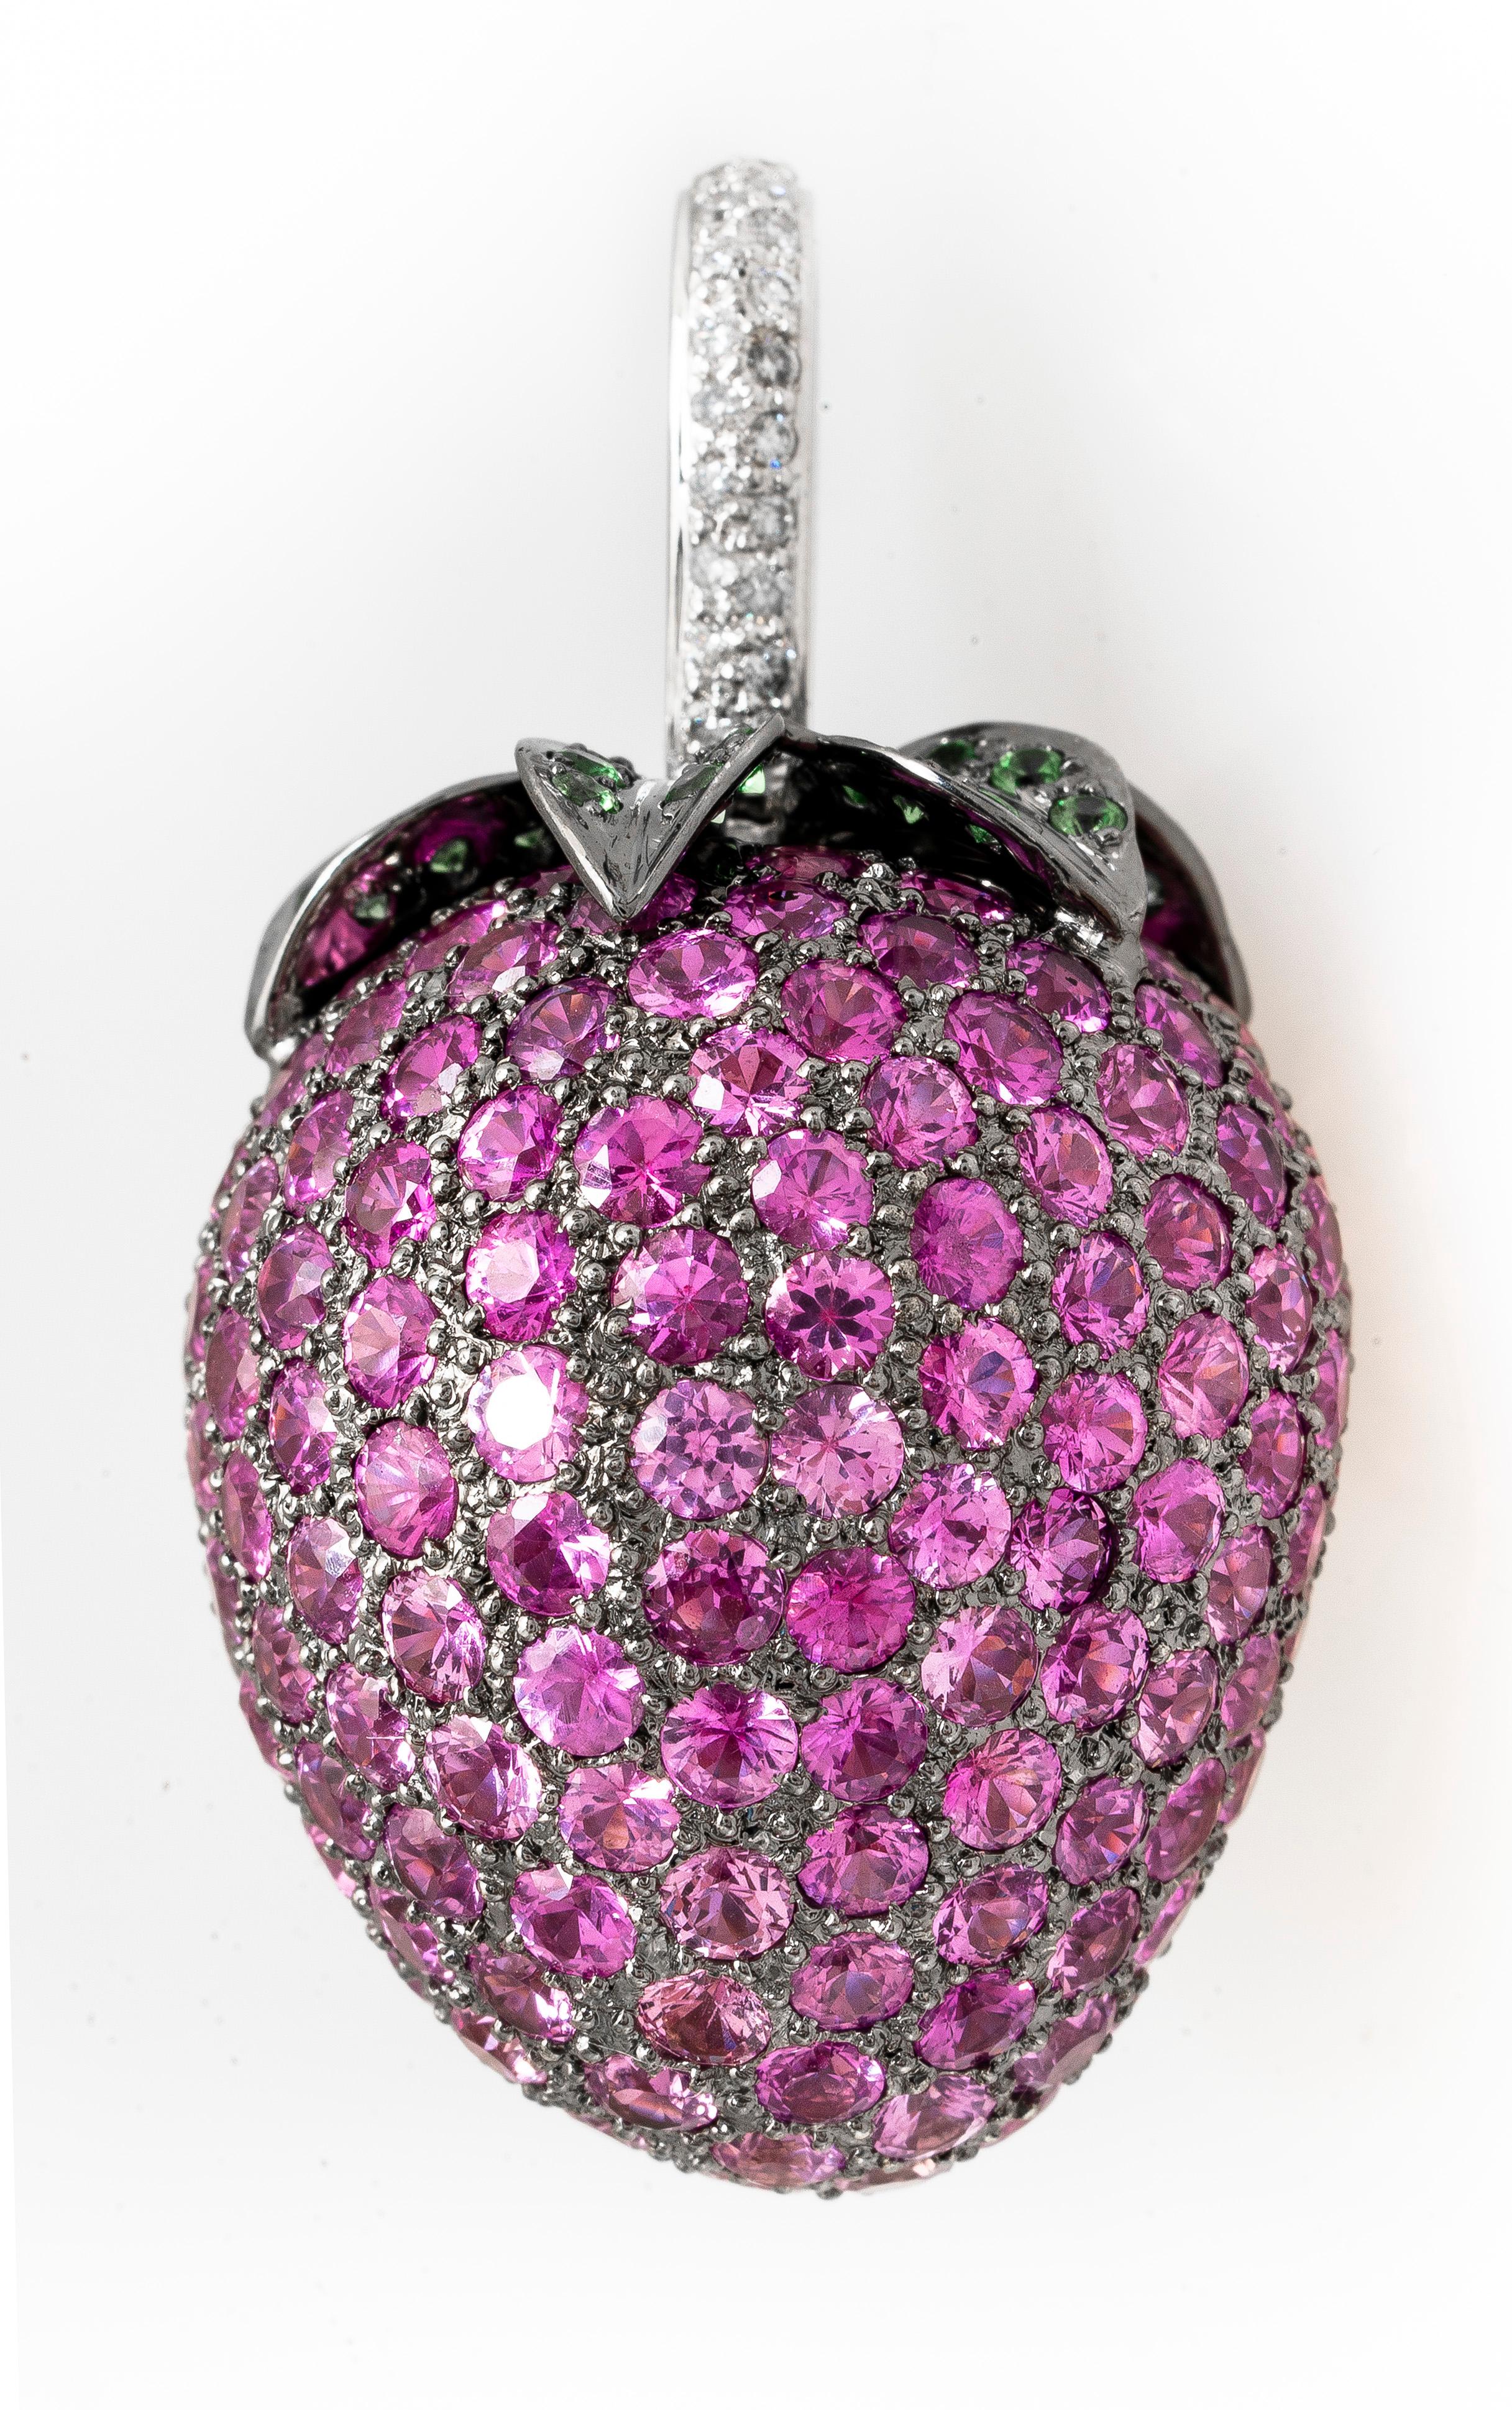 Vintage 18k white gold  large strawberry pendant with pave pink sapphires, tsavorite garnets and diamonds.  There are 12.66 carat total weight of rbc pink sapphires making up the flesh of the strawberry.  The leaves have 0.72 carat total weight of